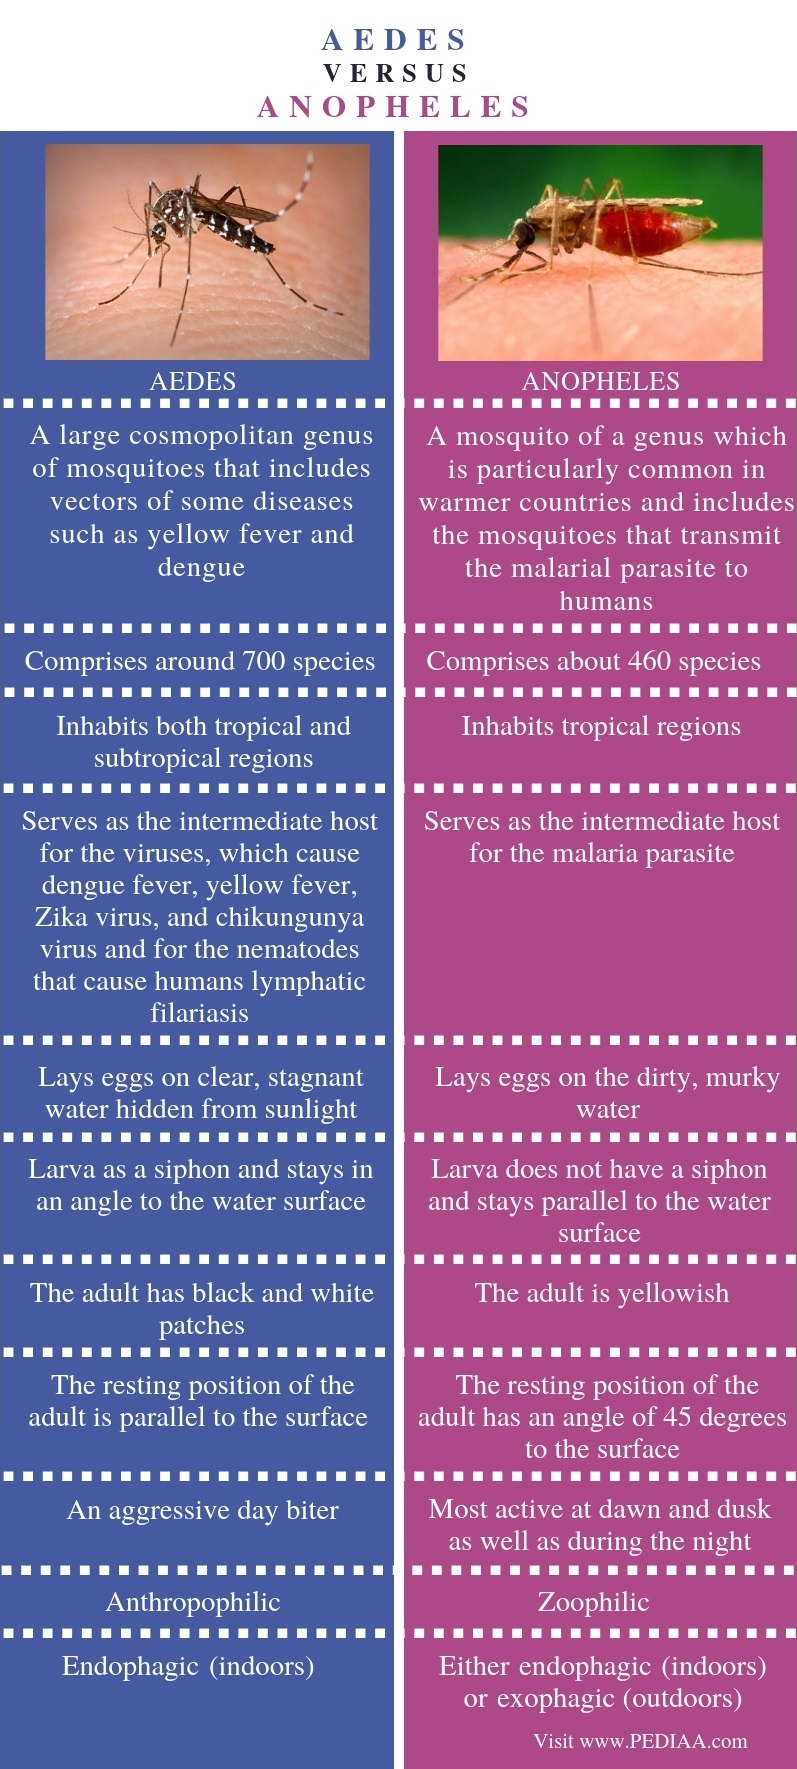 Difference Between Aedes and Anopheles Mosquito - Comparison Summary